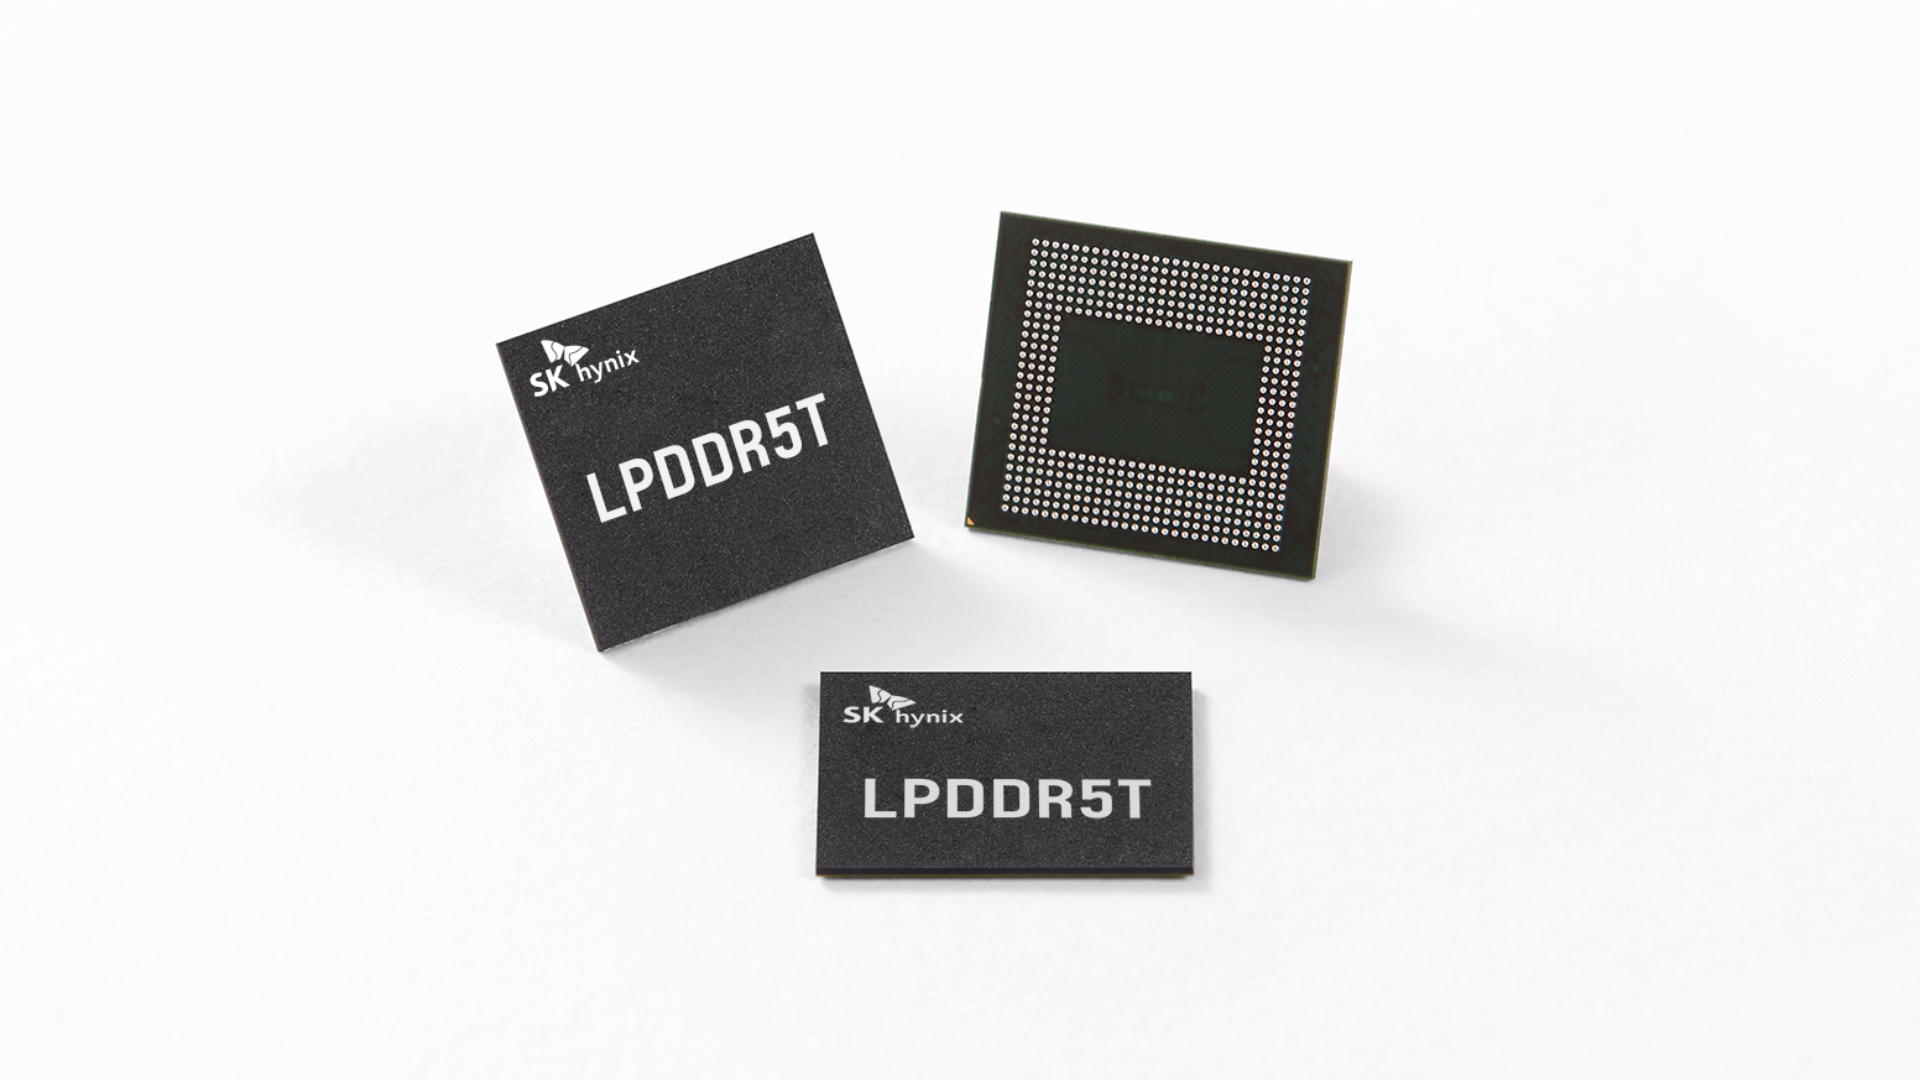 Samsung To Likely Start Mass Production of LPDDR5T Chips by 2024